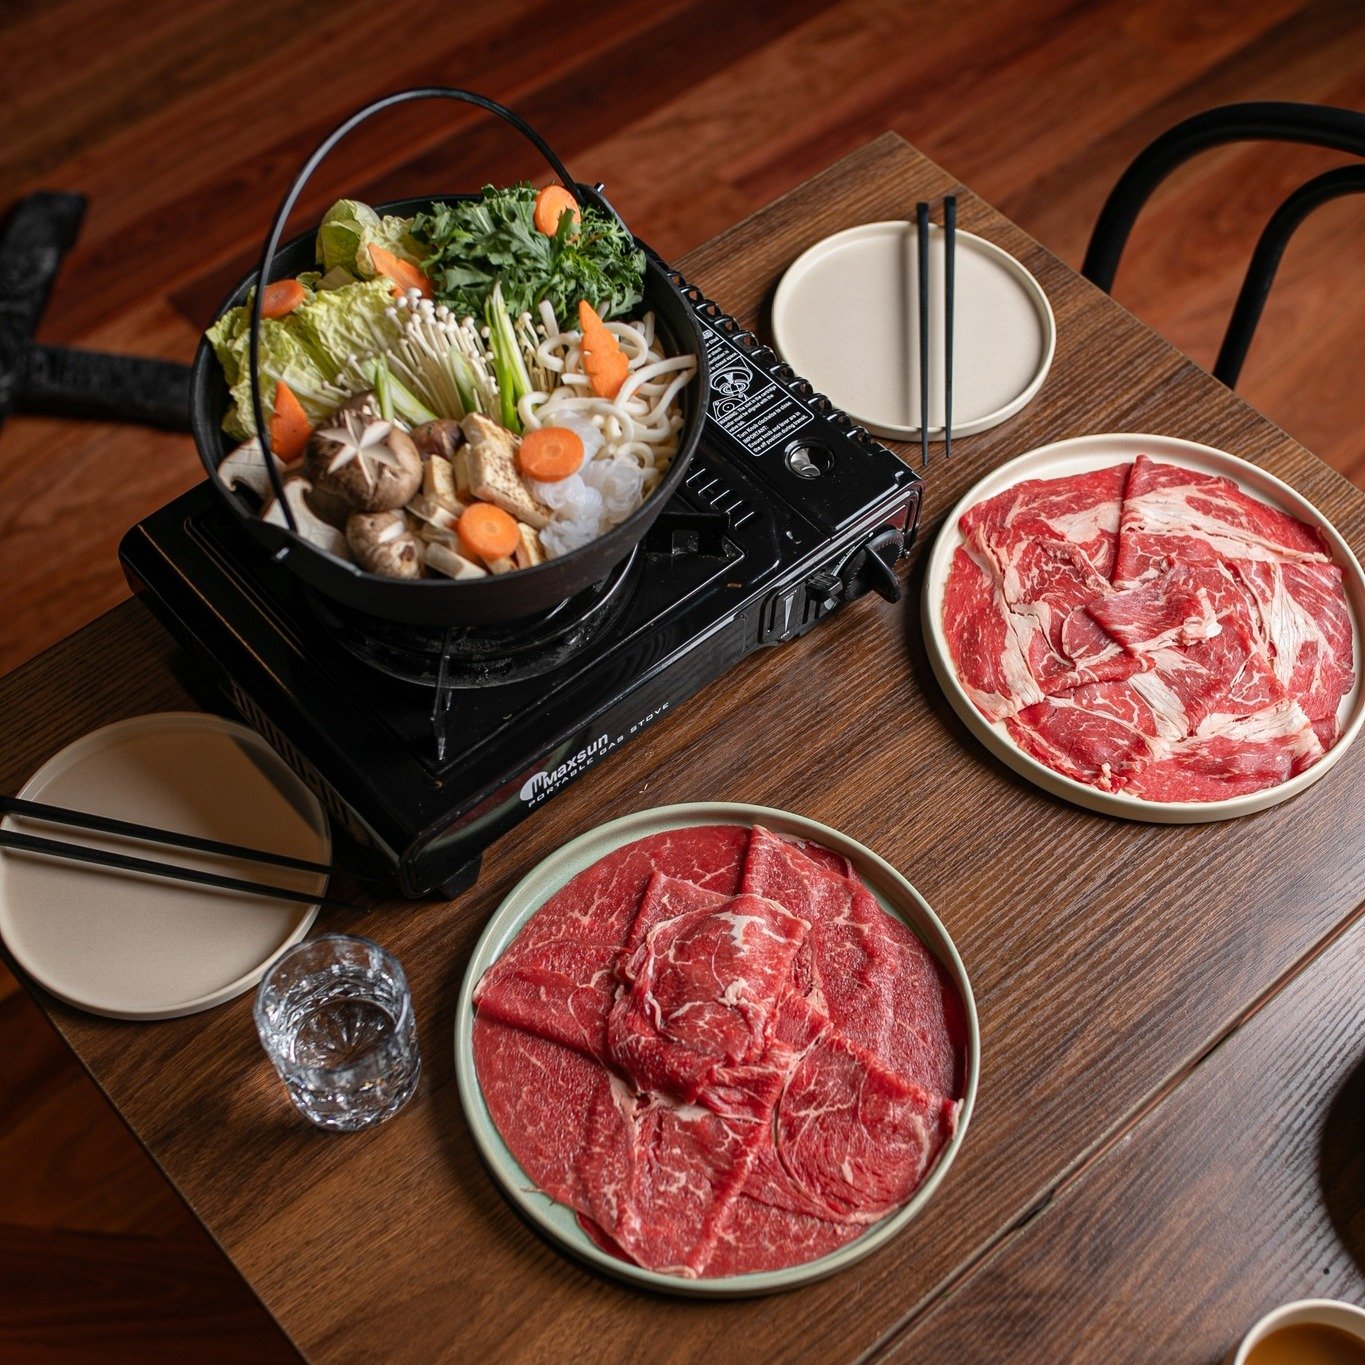 Discover sukiyaki heaven at Chop Chop! 

Choose between our Wagyu MBS4-5 or MBS8-9 sukiyaki sets, complete with pickled lotus root, a delightful vegetable platter, udon noodles, and two raw eggs for dipping sauce. Elevate your dining experience with 